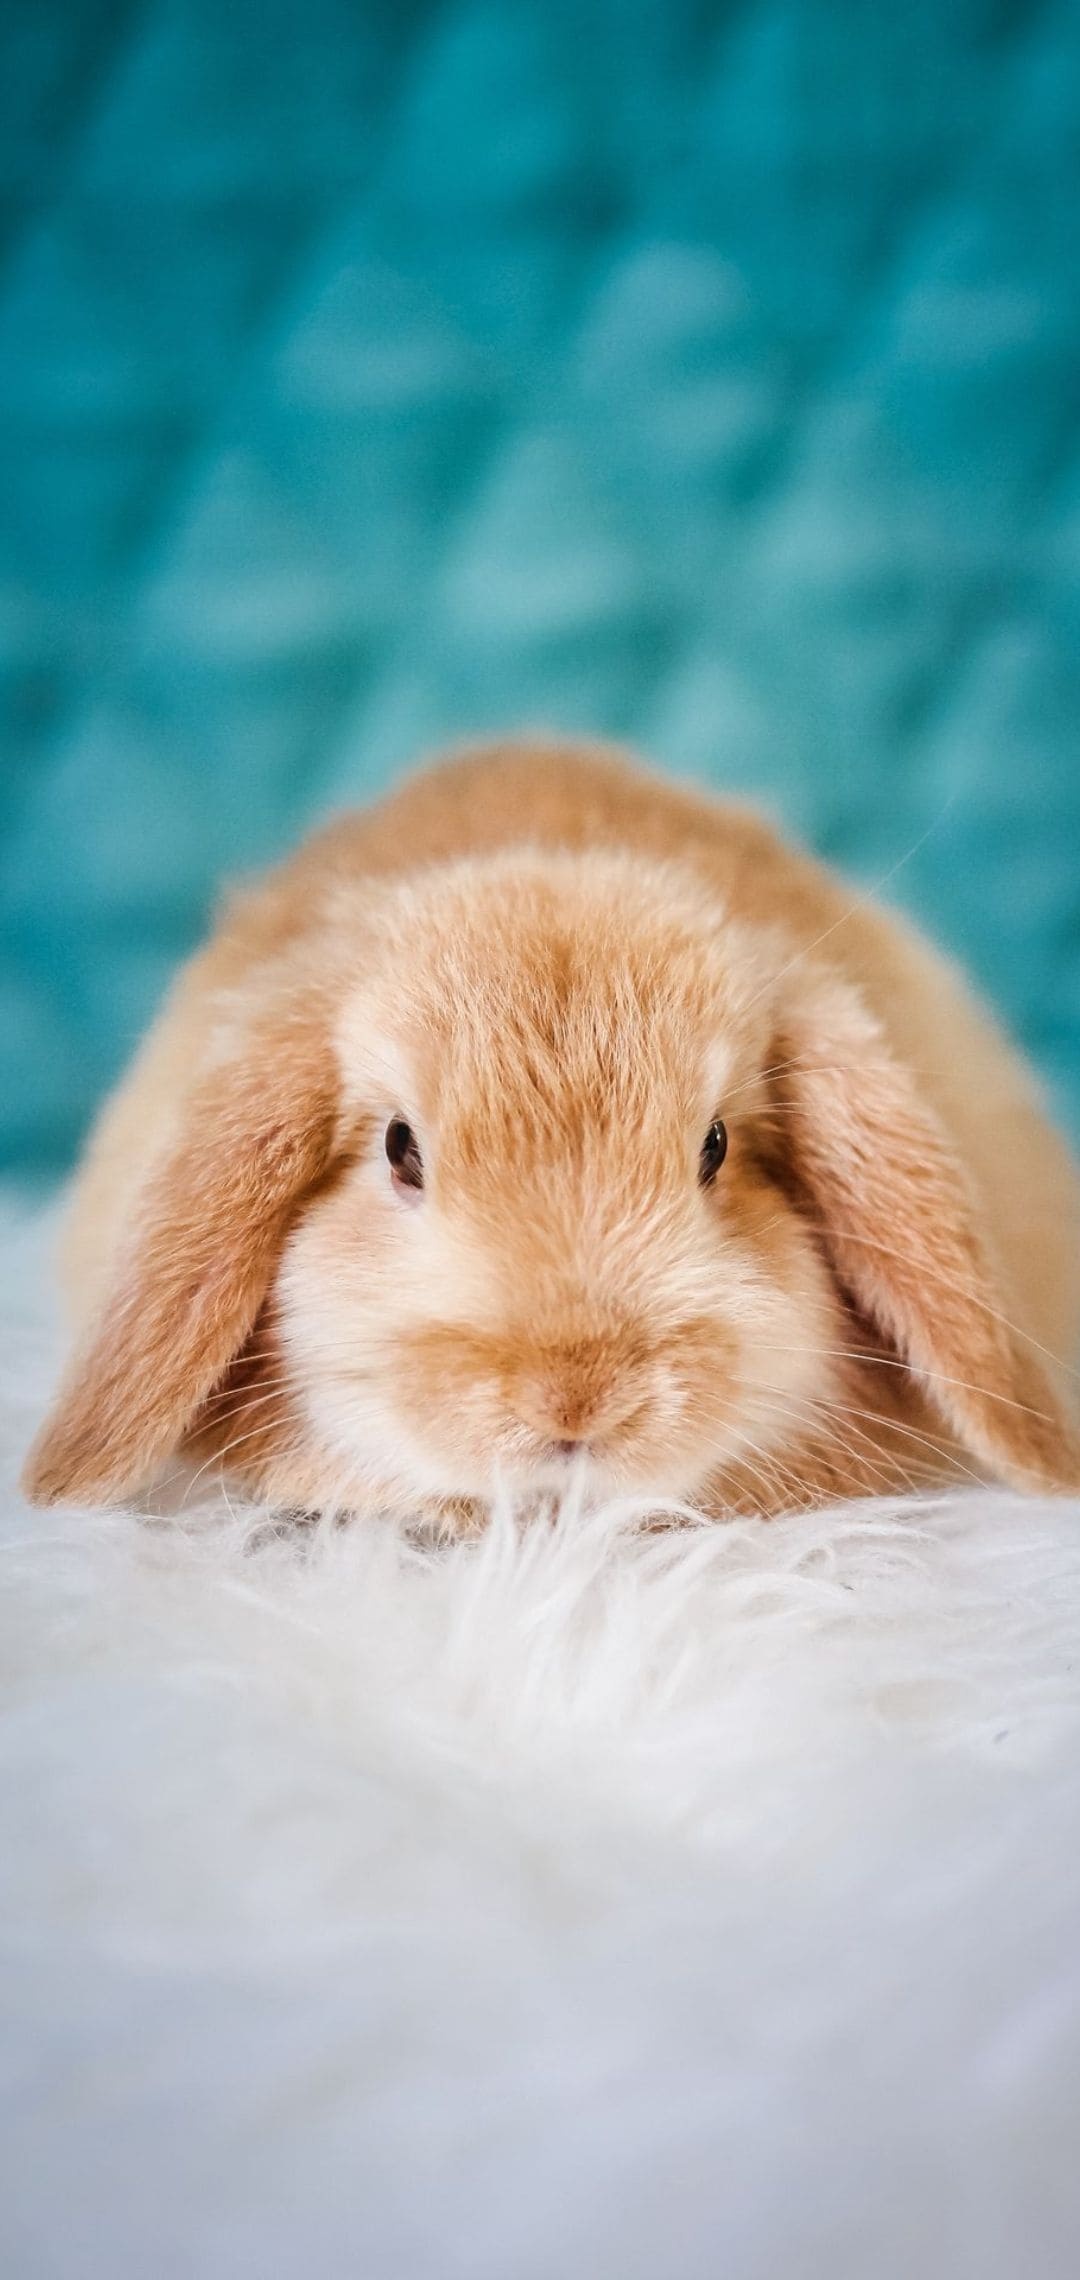 Bunny: American Fuzzy Lops, An active, playful, social breed with much personality. 1080x2280 HD Wallpaper.